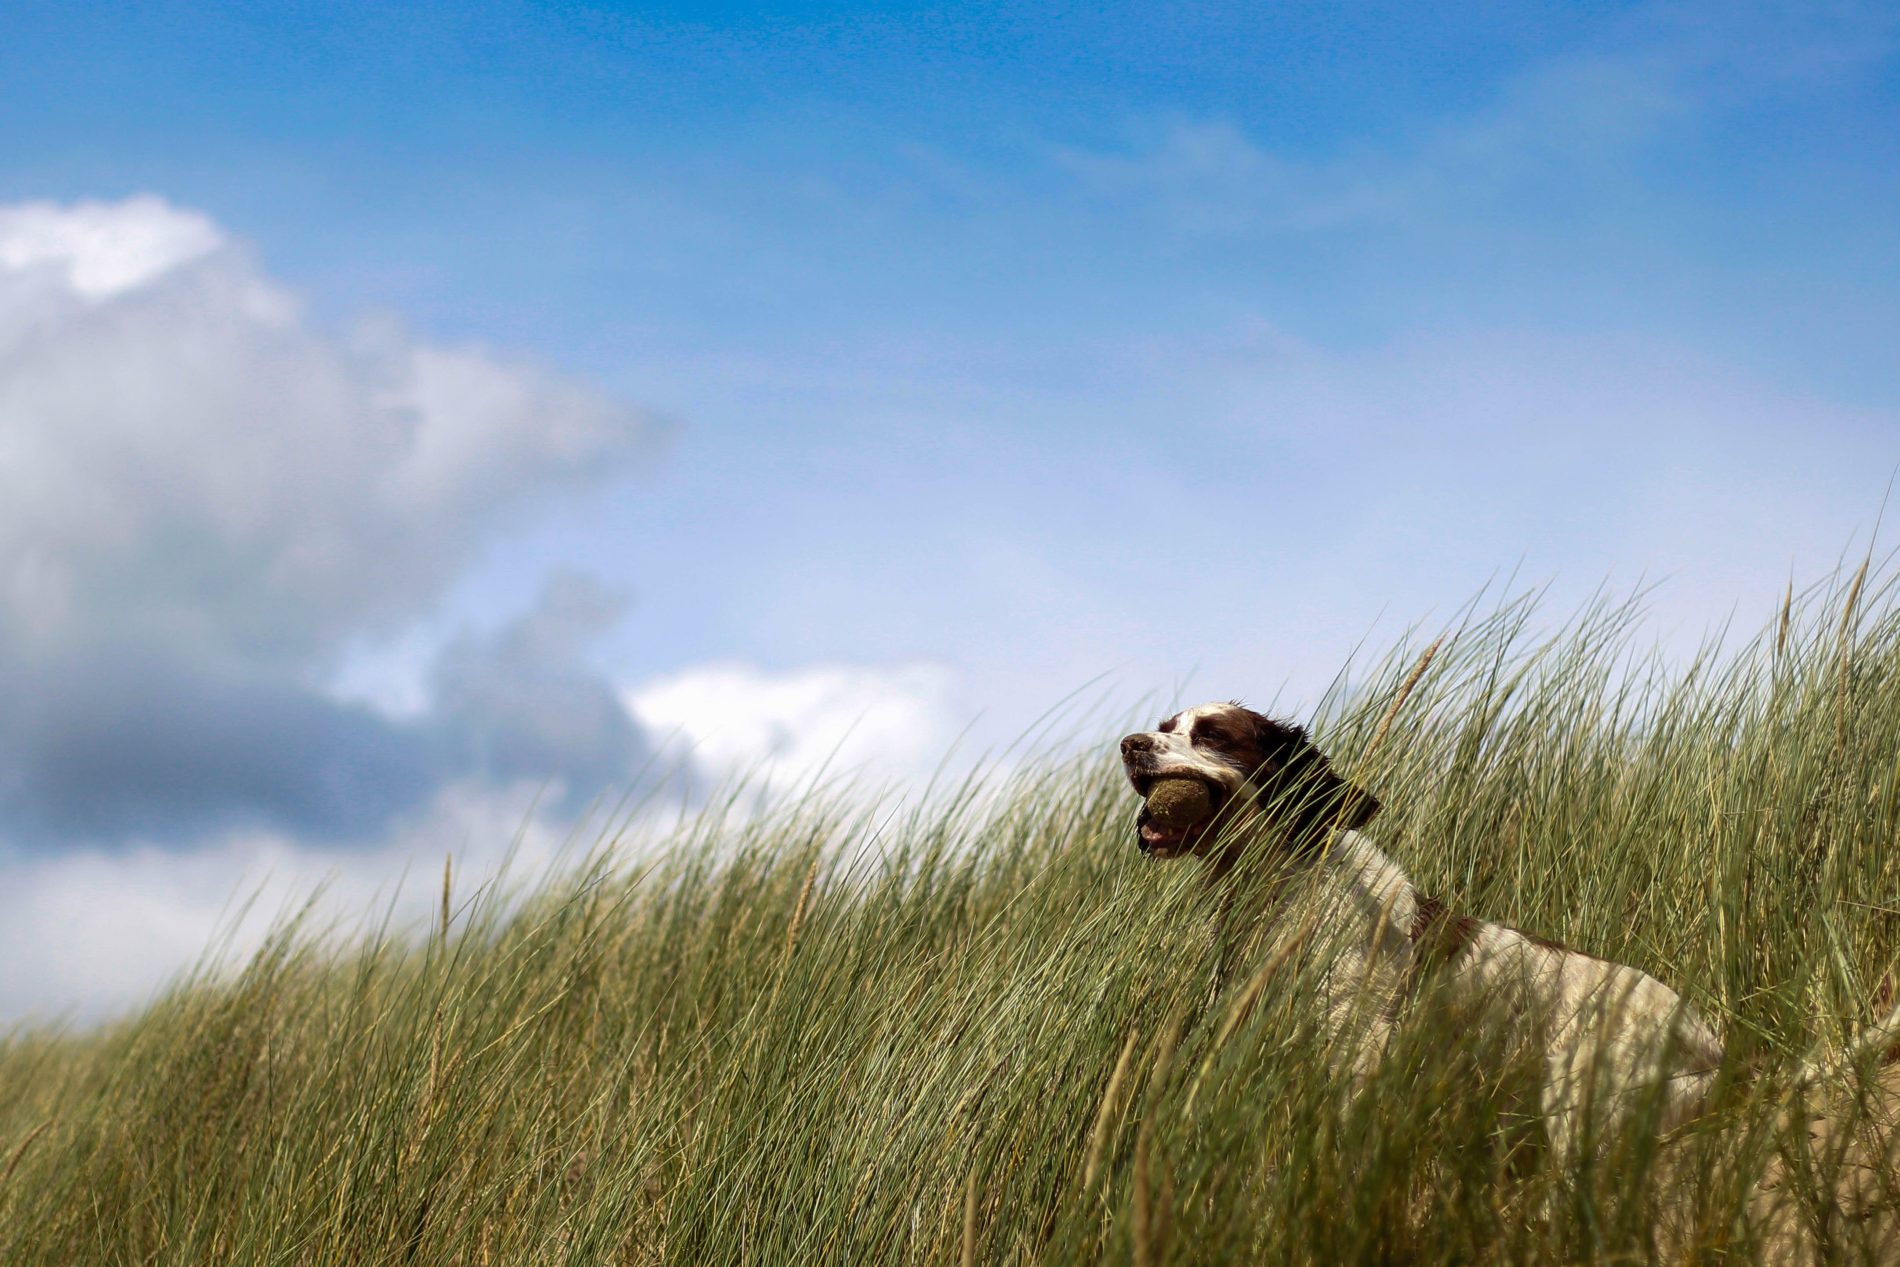 A dog with a ball in its mouth sits in high grass as the wind blows.